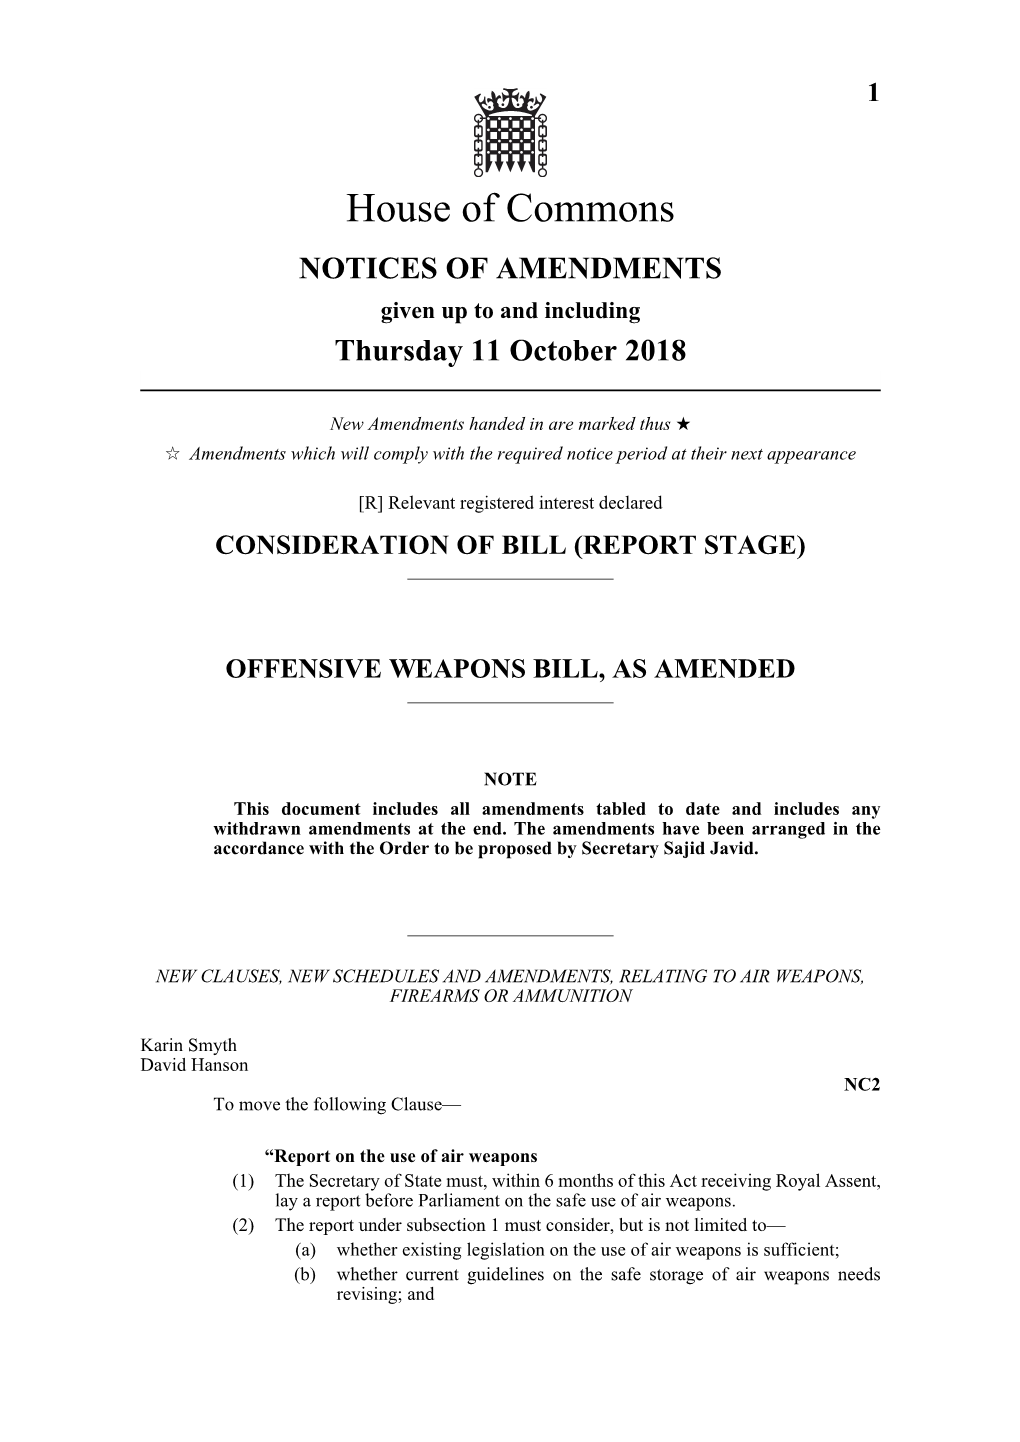 Offensive Weapons Bill, As Amended